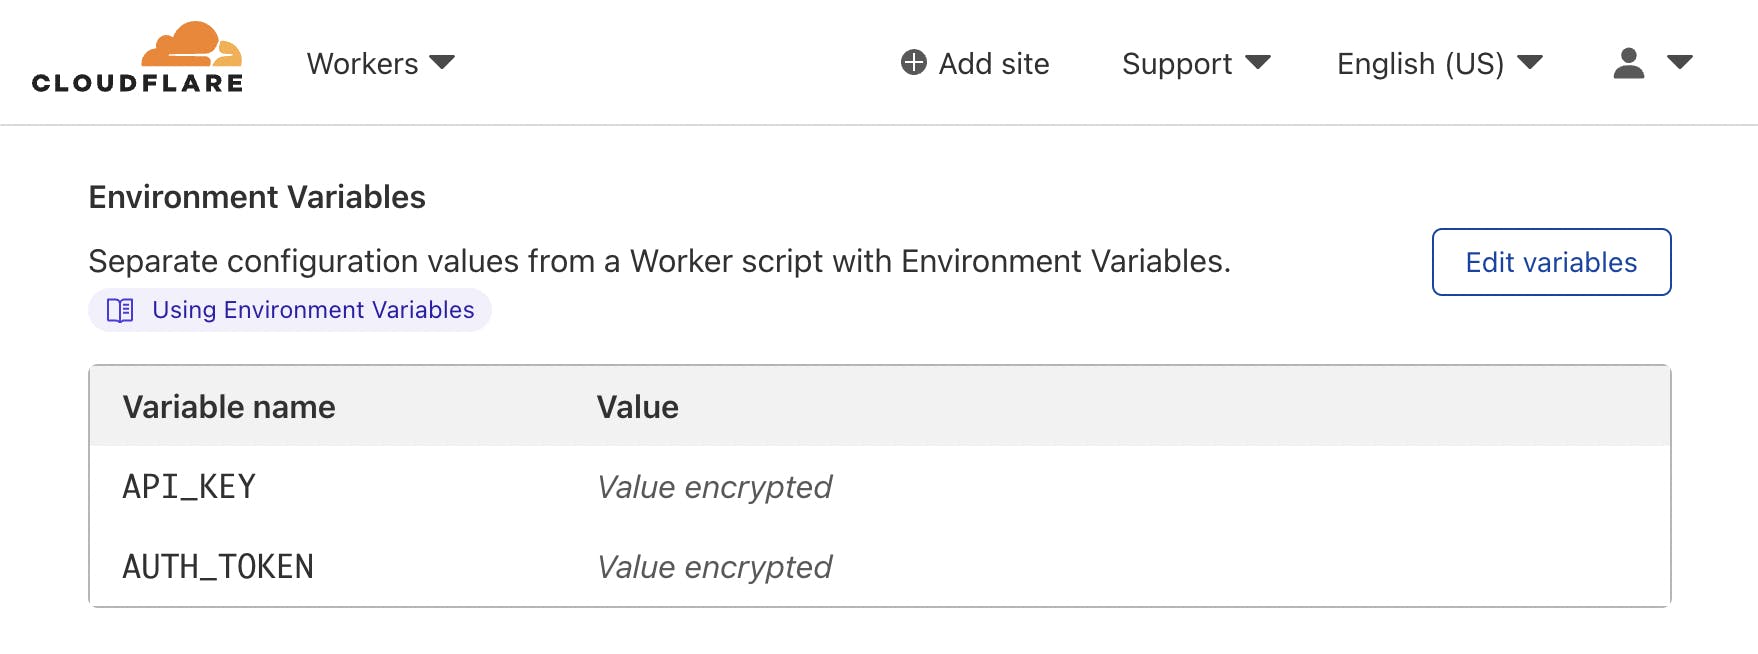 Cloudflare Workers’ environment variable management UI